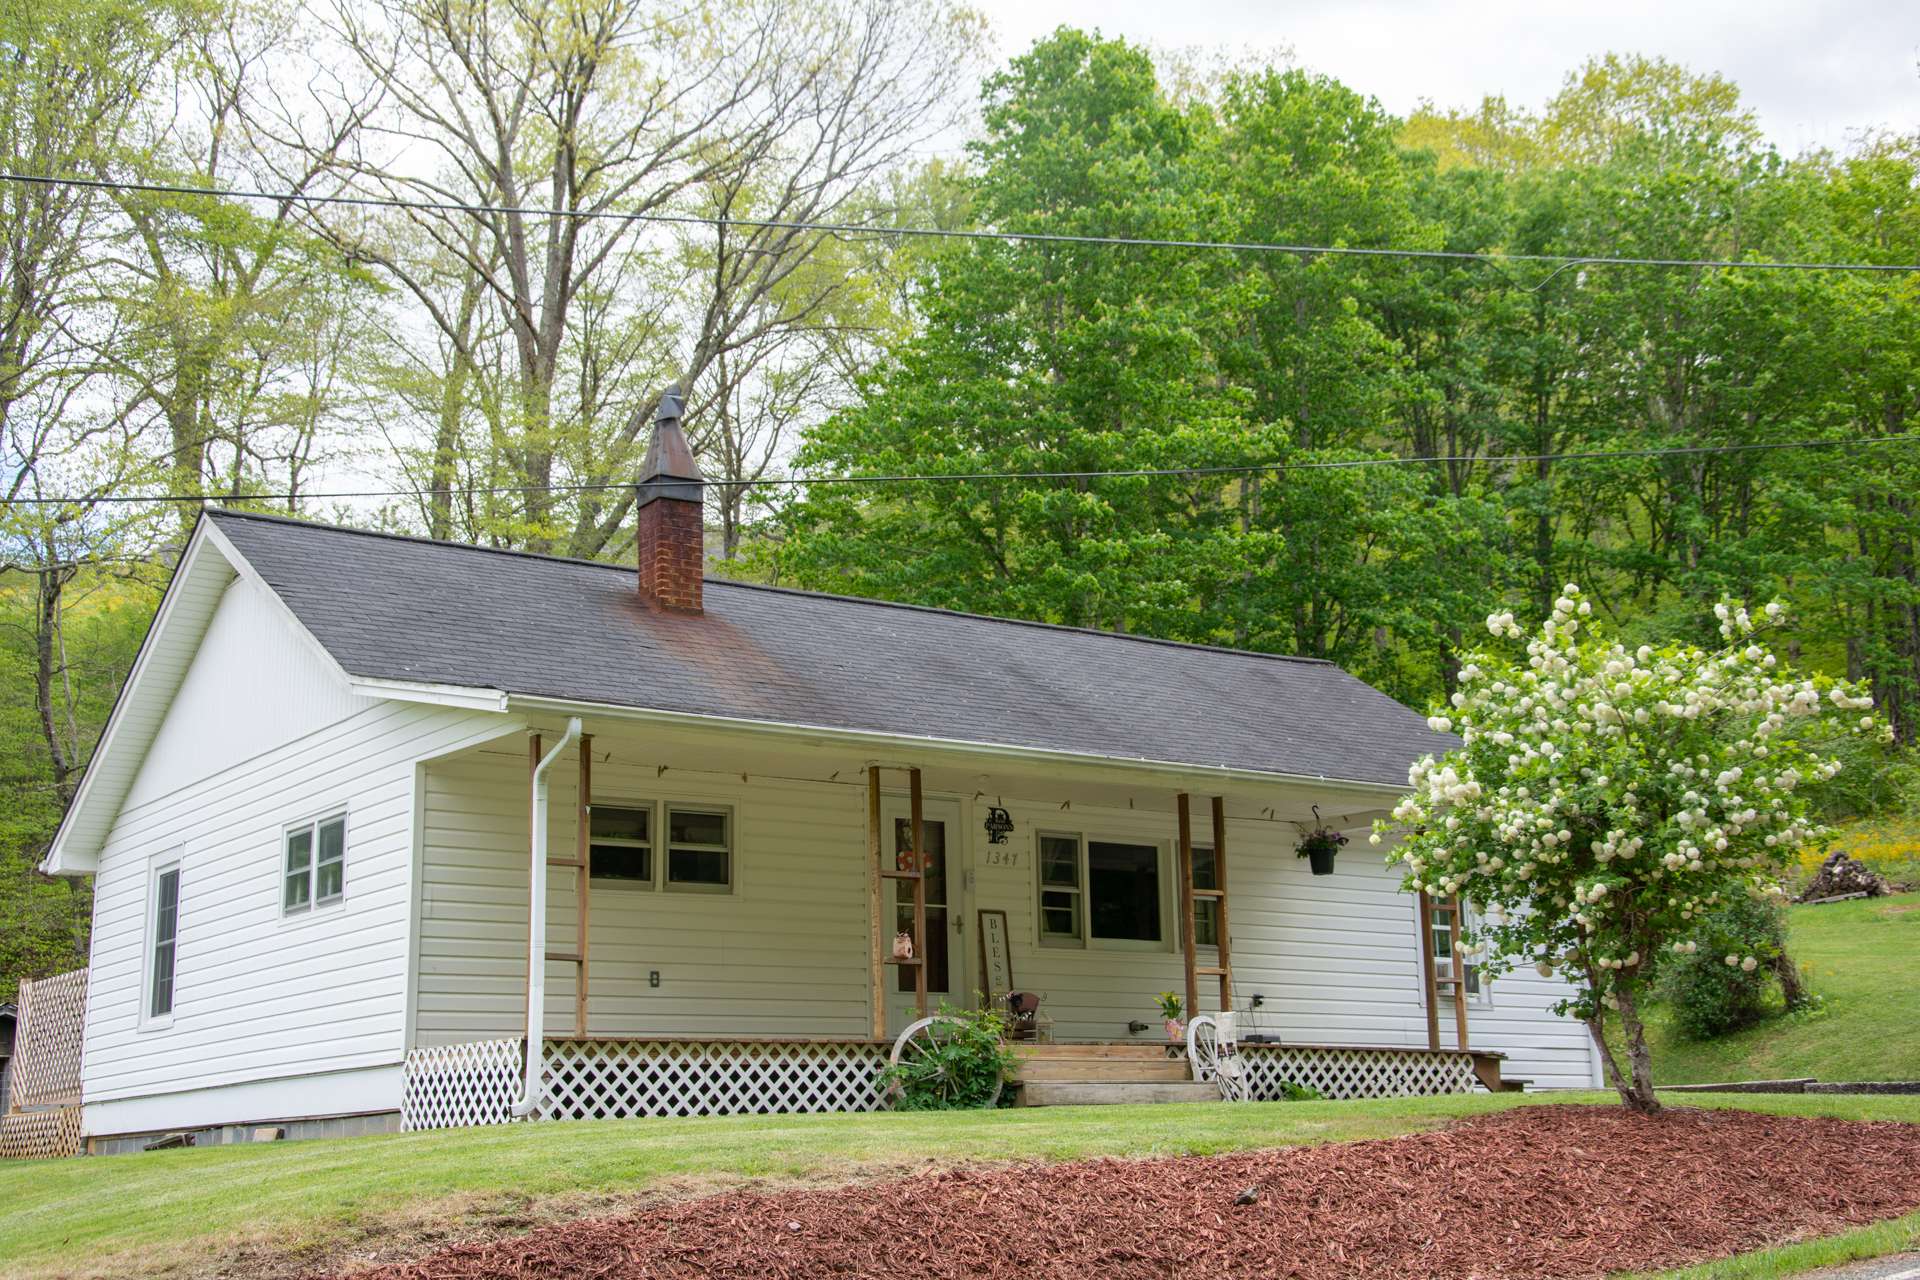 Located on Ed Little Road in the Warrensville area of Ashe County in the North Carolina Mountains, this cozy farmhouse style cottage is only a short walk to the New River.